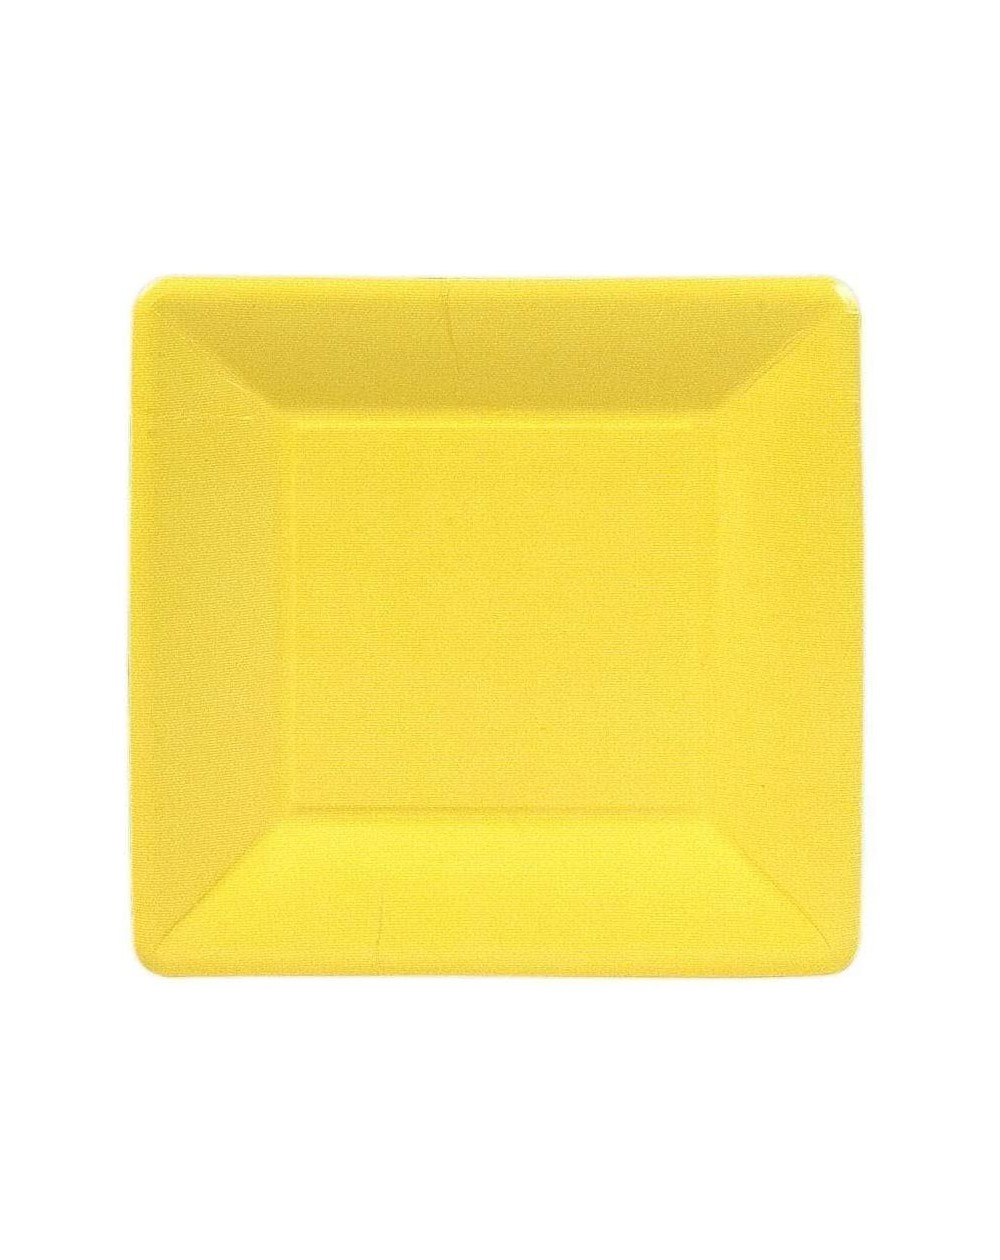 Tableware Grosgrain Square Paper Salad & Dessert Plates in Yellow- Pack of 8 - Yellow - CL113F5AJDL $19.69